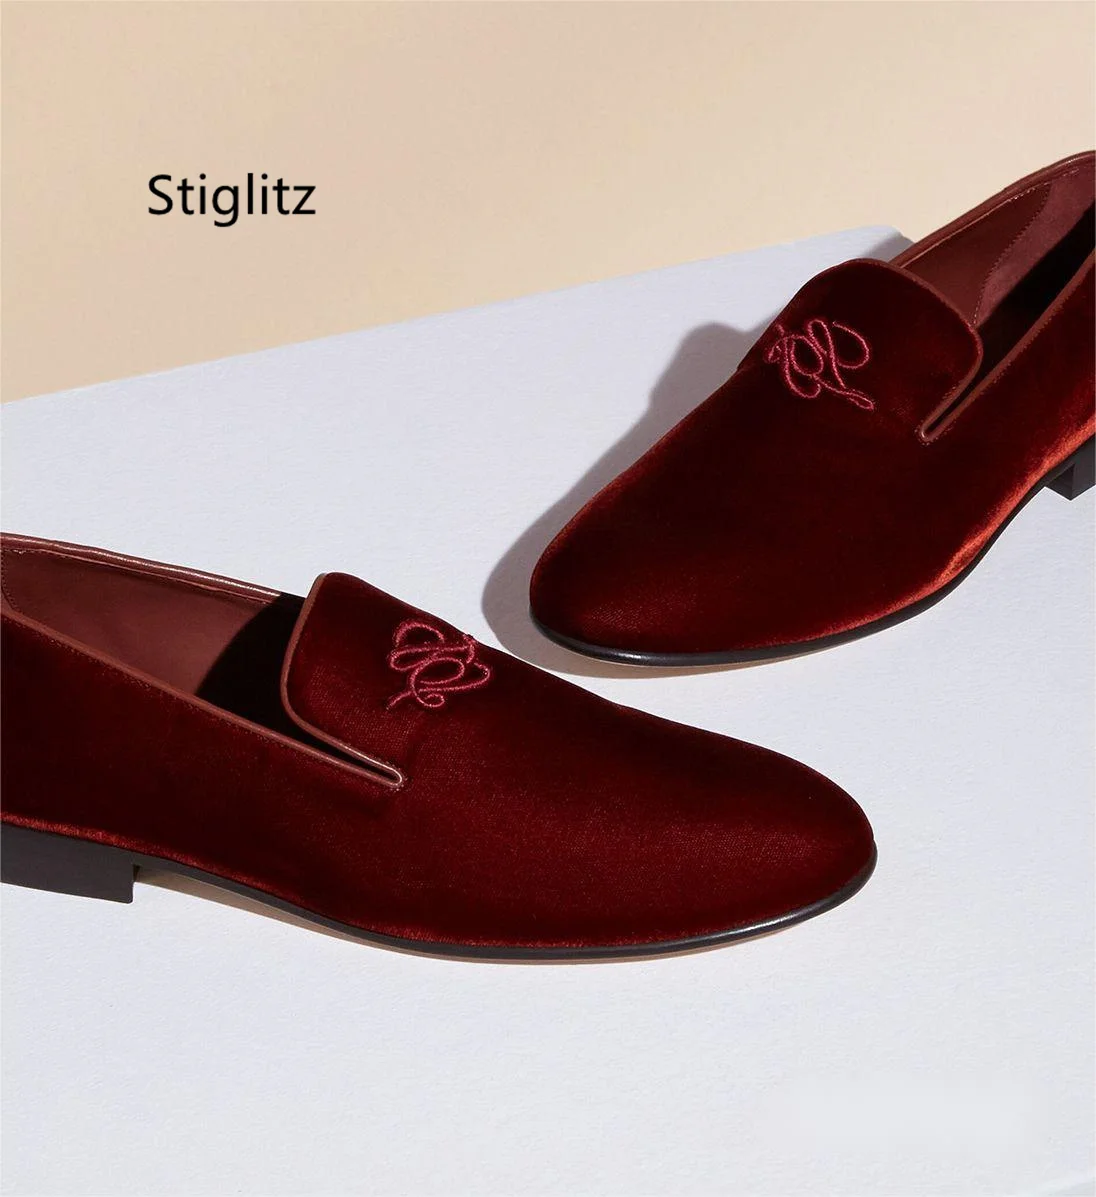 Slip On Flat Loafers Shoes Velvet Men Casual Shoes New Luxury Designer Fashion Concise Black Red Party Wedding Shoes Footwear